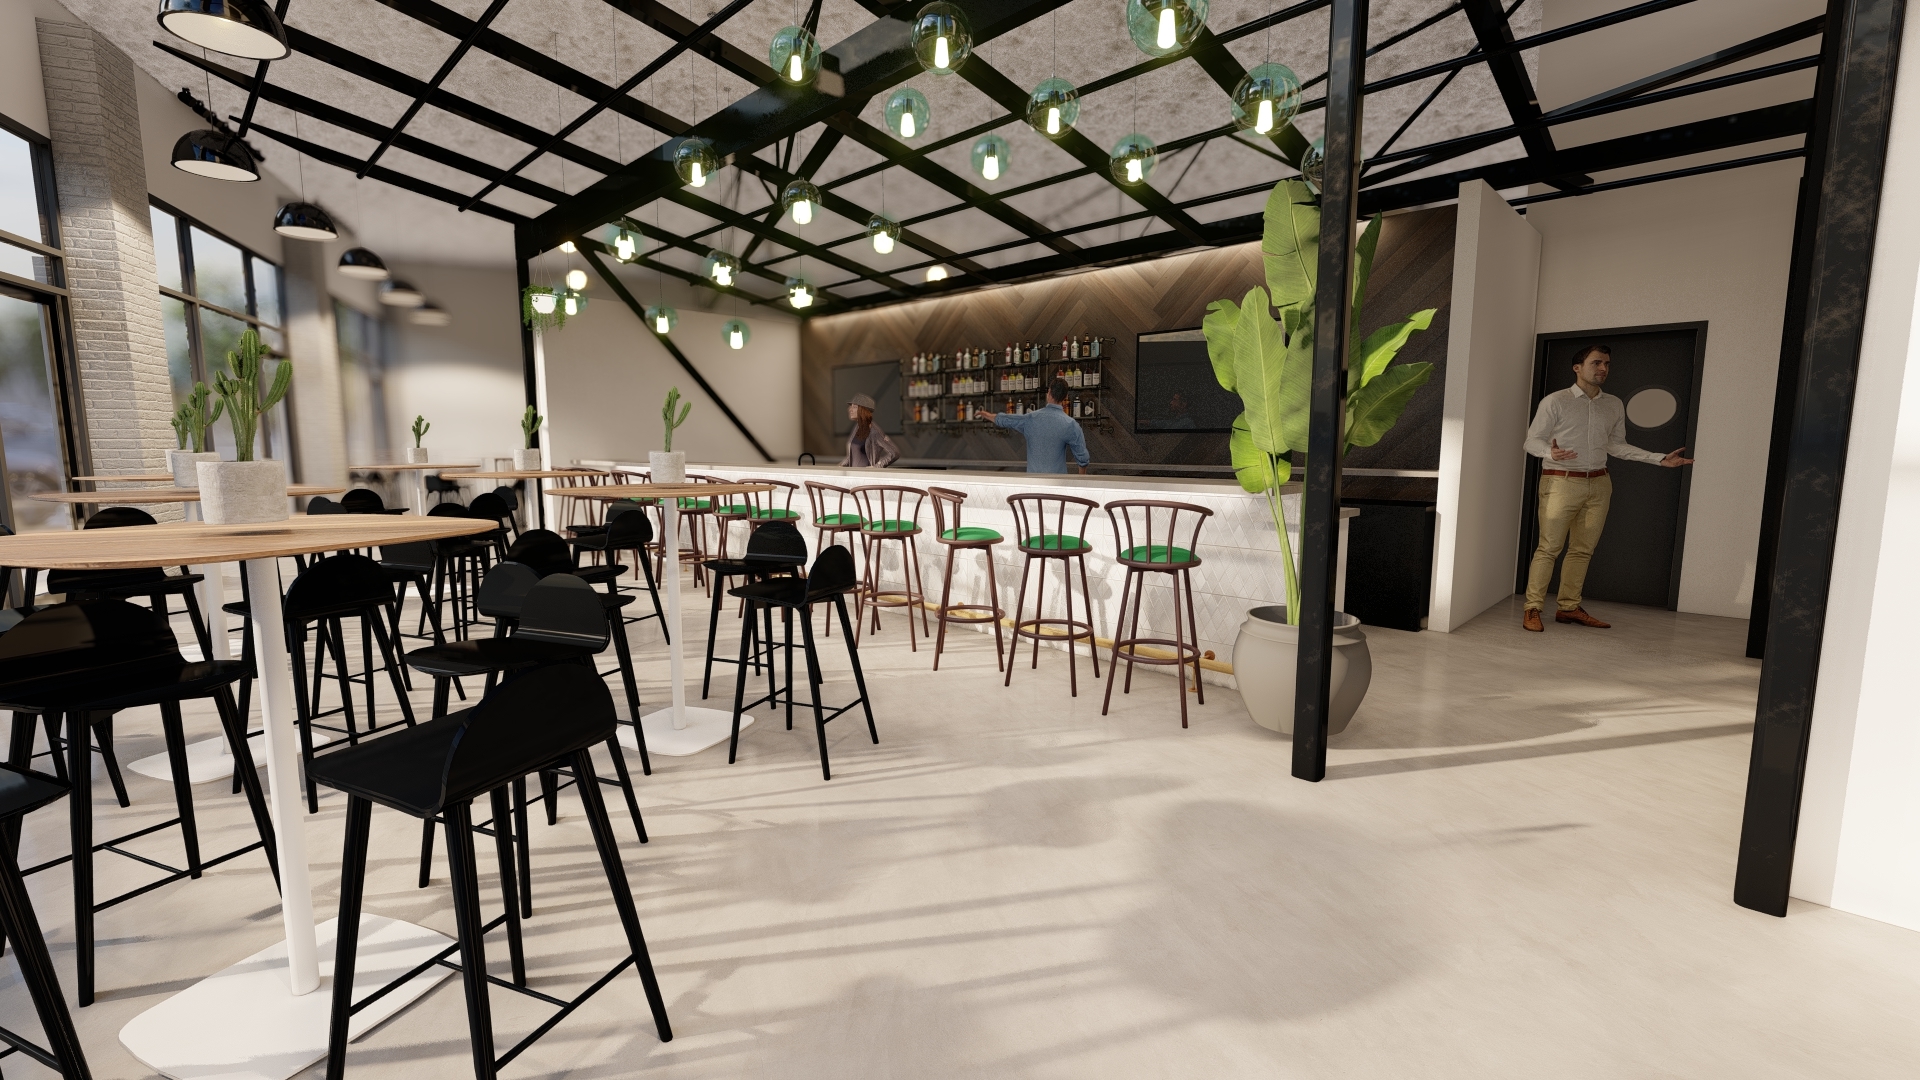 Upon entering, customers will be greeted with seating and a bar area designed with a lot of light.